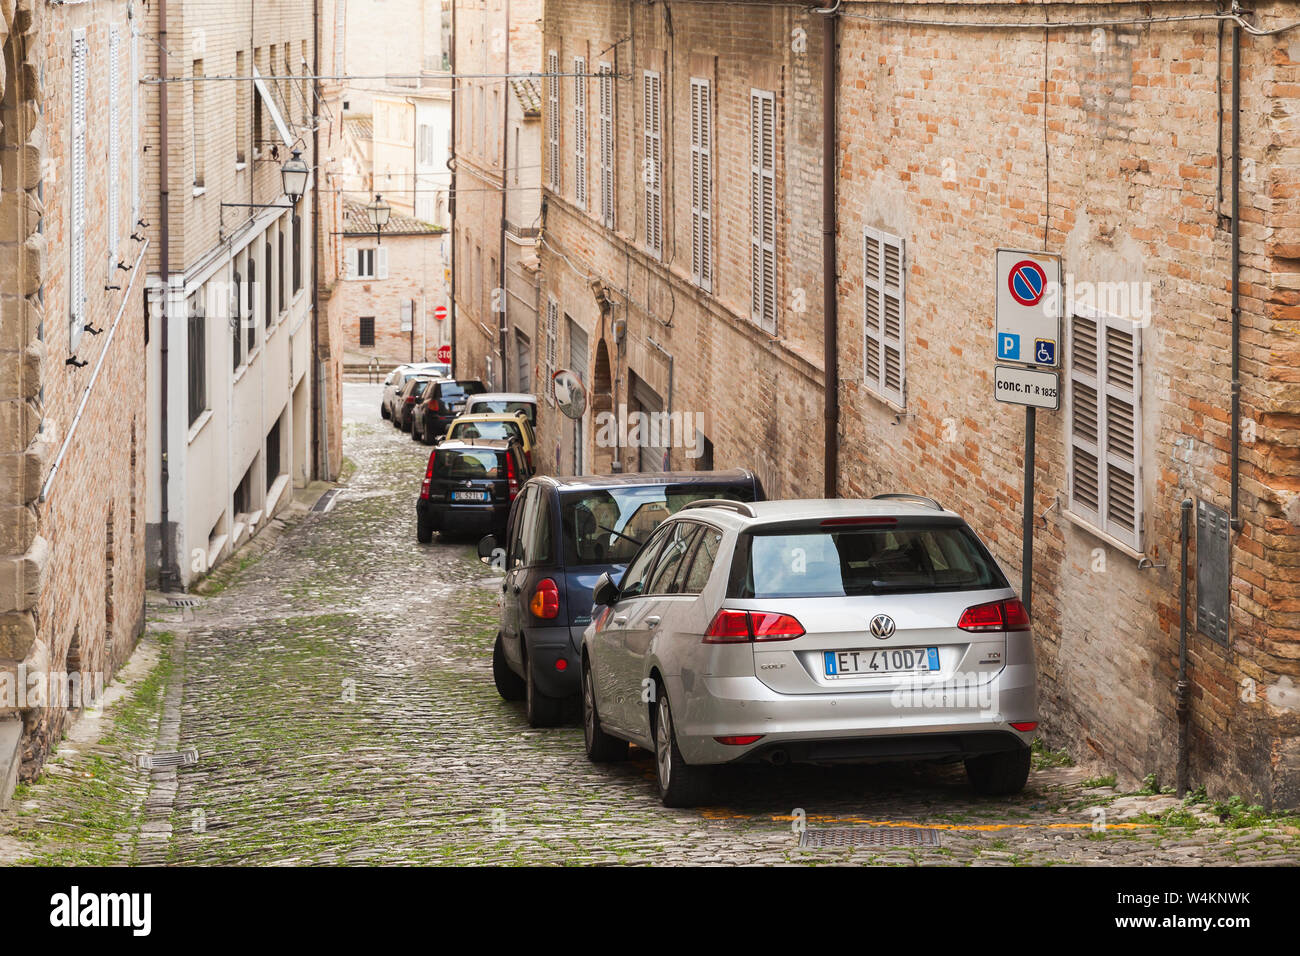 Fermo, Italy - February 11, 2016: Perspective view of narrow street with parked cars in Fermo, Italian old town Stock Photo